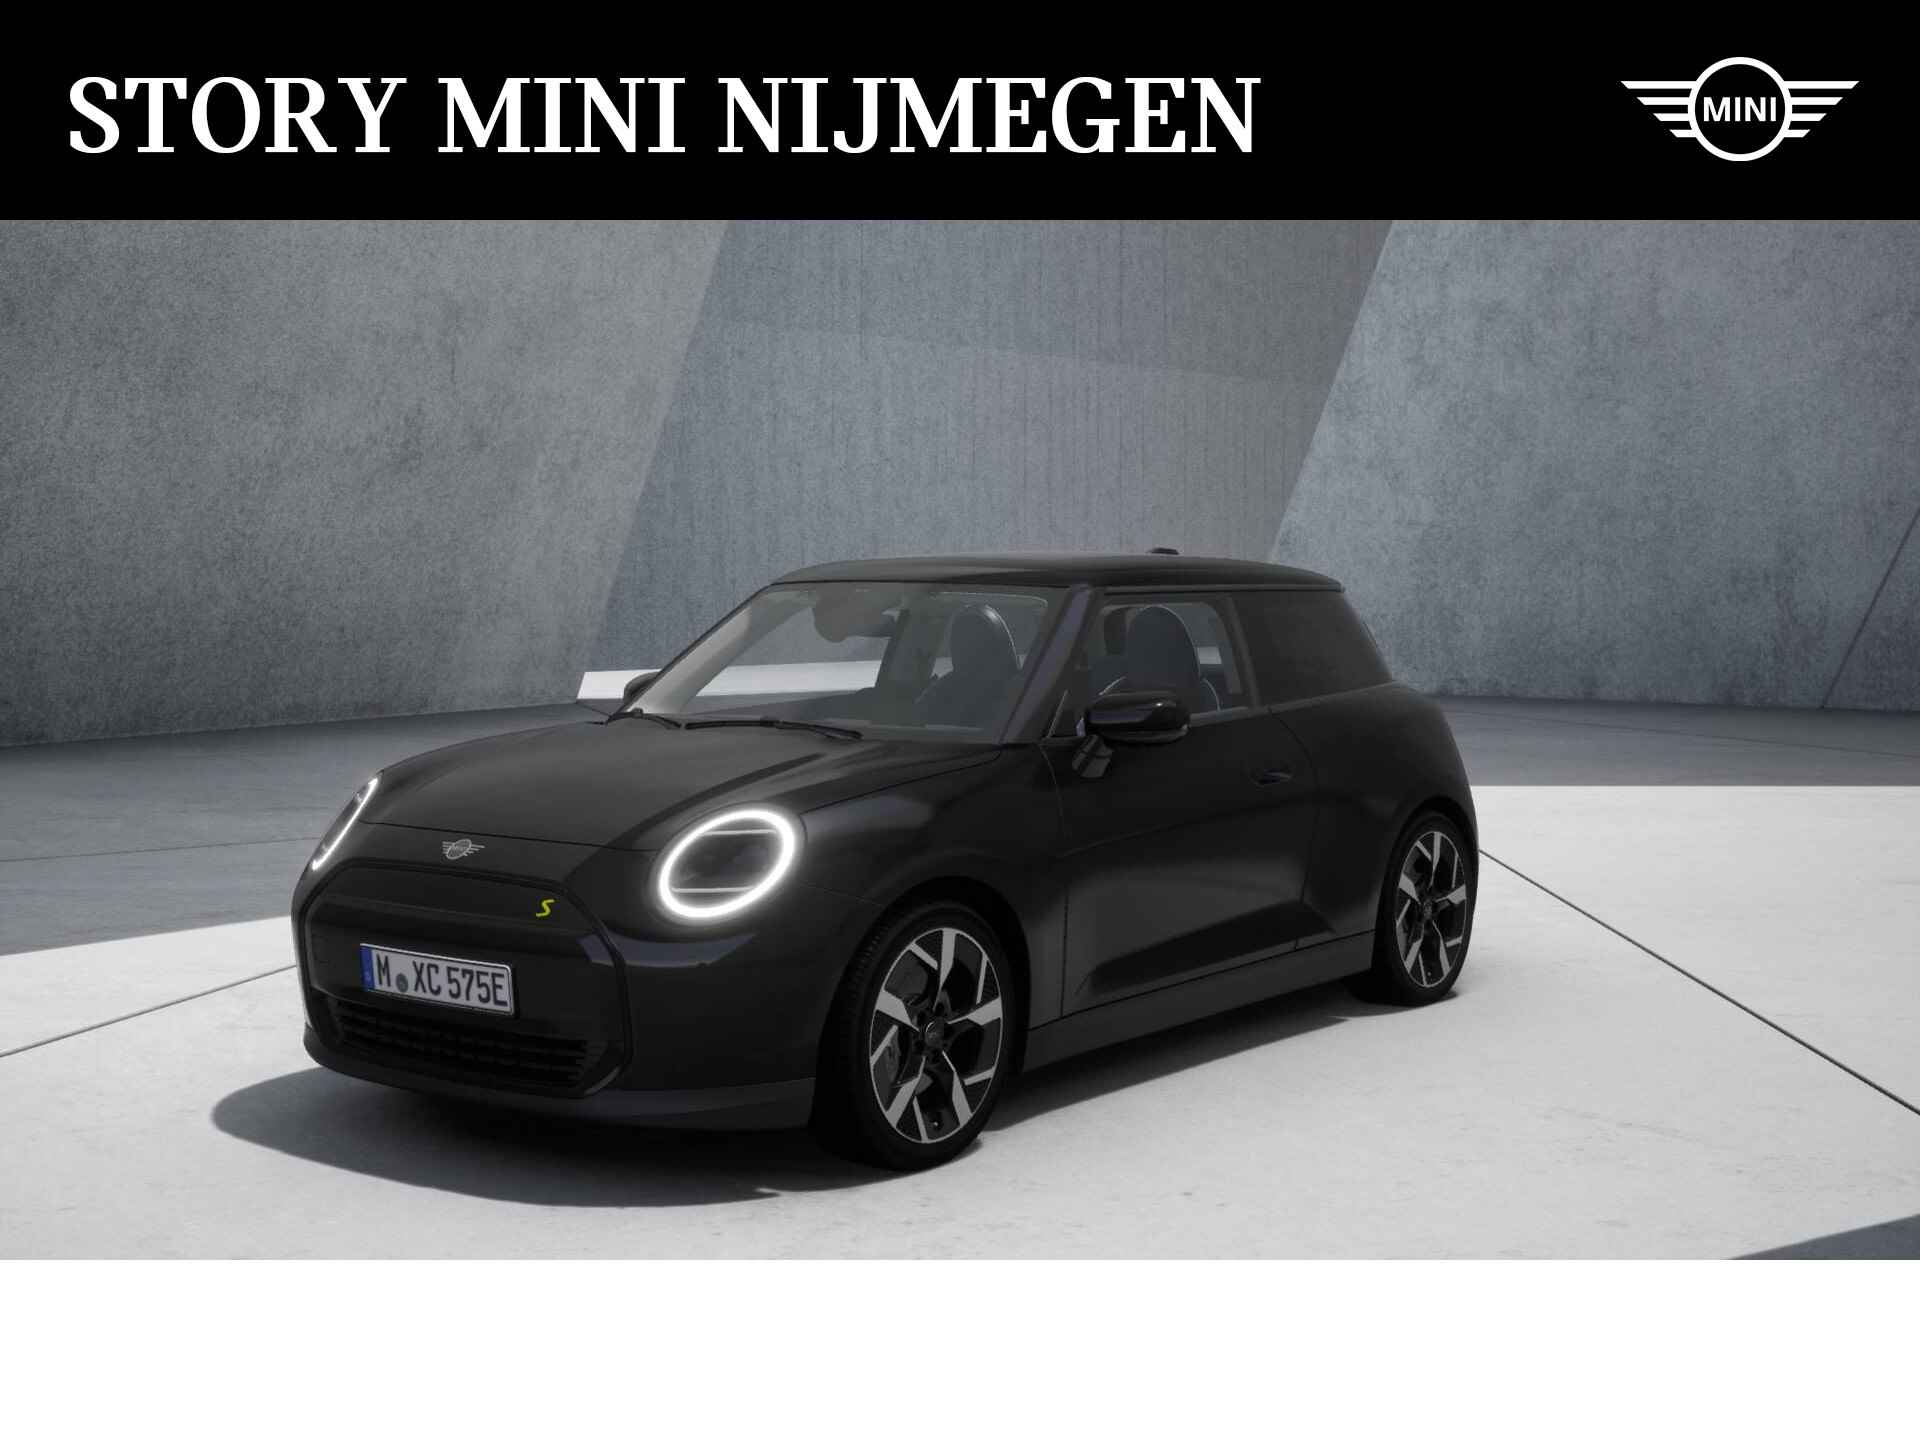 MINI Hatchback Cooper SE Classic 54.2 kWh / Panoramadak / LED / Head-Up / Parking Assistant / Comfort Access / Stoelverwarming / Extra getint glas achter - 1/11